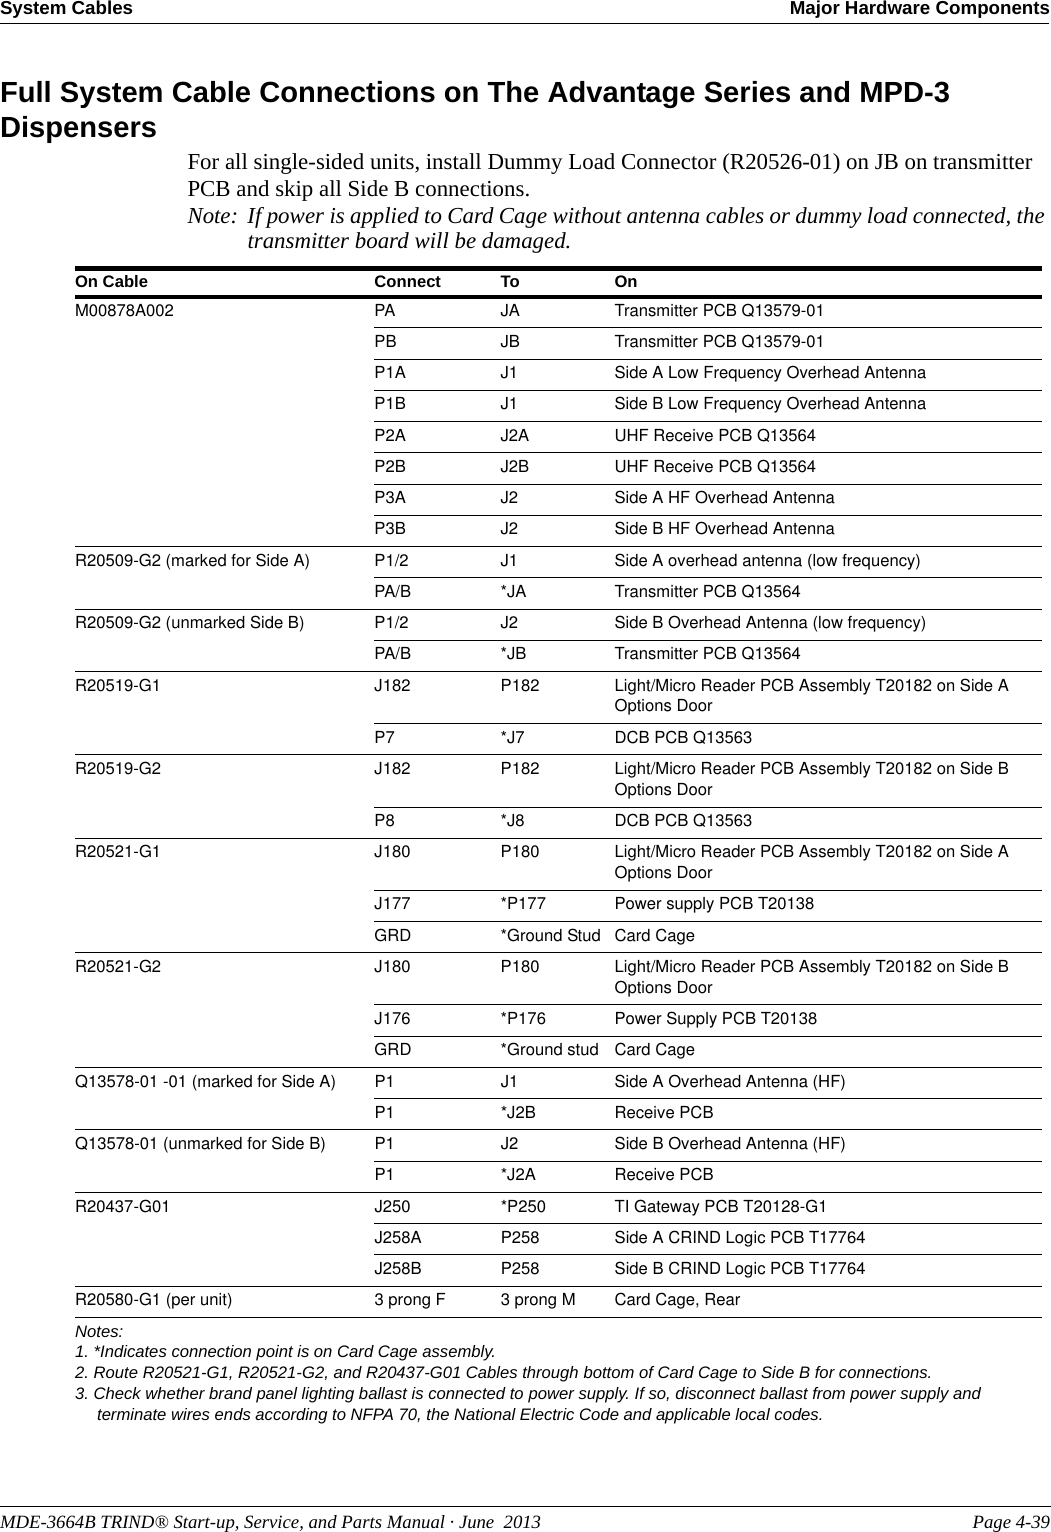 MDE-3664B TRIND® Start-up, Service, and Parts Manual · June  2013 Page 4-39System Cables Major Hardware ComponentsFull System Cable Connections on The Advantage Series and MPD-3 DispensersFor all single-sided units, install Dummy Load Connector (R20526-01) on JB on transmitter PCB and skip all Side B connections.Note: If power is applied to Card Cage without antenna cables or dummy load connected, the transmitter board will be damaged.On Cable Connect To OnM00878A002 PA JA Transmitter PCB Q13579-01PB JB Transmitter PCB Q13579-01P1A J1 Side A Low Frequency Overhead AntennaP1B J1 Side B Low Frequency Overhead AntennaP2A J2A UHF Receive PCB Q13564P2B J2B UHF Receive PCB Q13564P3A J2 Side A HF Overhead AntennaP3B J2 Side B HF Overhead AntennaR20509-G2 (marked for Side A) P1/2 J1 Side A overhead antenna (low frequency)PA/B *JA Transmitter PCB Q13564R20509-G2 (unmarked Side B) P1/2 J2 Side B Overhead Antenna (low frequency)PA/B *JB Transmitter PCB Q13564R20519-G1 J182 P182 Light/Micro Reader PCB Assembly T20182 on Side A Options DoorP7 *J7 DCB PCB Q13563R20519-G2 J182 P182 Light/Micro Reader PCB Assembly T20182 on Side B Options DoorP8 *J8 DCB PCB Q13563R20521-G1 J180 P180 Light/Micro Reader PCB Assembly T20182 on Side A Options DoorJ177 *P177 Power supply PCB T20138GRD *Ground Stud Card CageR20521-G2 J180 P180 Light/Micro Reader PCB Assembly T20182 on Side B Options DoorJ176 *P176 Power Supply PCB T20138GRD *Ground stud Card CageQ13578-01 -01 (marked for Side A) P1 J1 Side A Overhead Antenna (HF)P1 *J2B Receive PCBQ13578-01 (unmarked for Side B) P1 J2 Side B Overhead Antenna (HF)P1 *J2A Receive PCBR20437-G01 J250 *P250 TI Gateway PCB T20128-G1J258A P258 Side A CRIND Logic PCB T17764J258B P258 Side B CRIND Logic PCB T17764R20580-G1 (per unit) 3 prong F 3 prong M Card Cage, RearNotes:1. *Indicates connection point is on Card Cage assembly.2. Route R20521-G1, R20521-G2, and R20437-G01 Cables through bottom of Card Cage to Side B for connections.3. Check whether brand panel lighting ballast is connected to power supply. If so, disconnect ballast from power supply and terminate wires ends according to NFPA 70, the National Electric Code and applicable local codes.